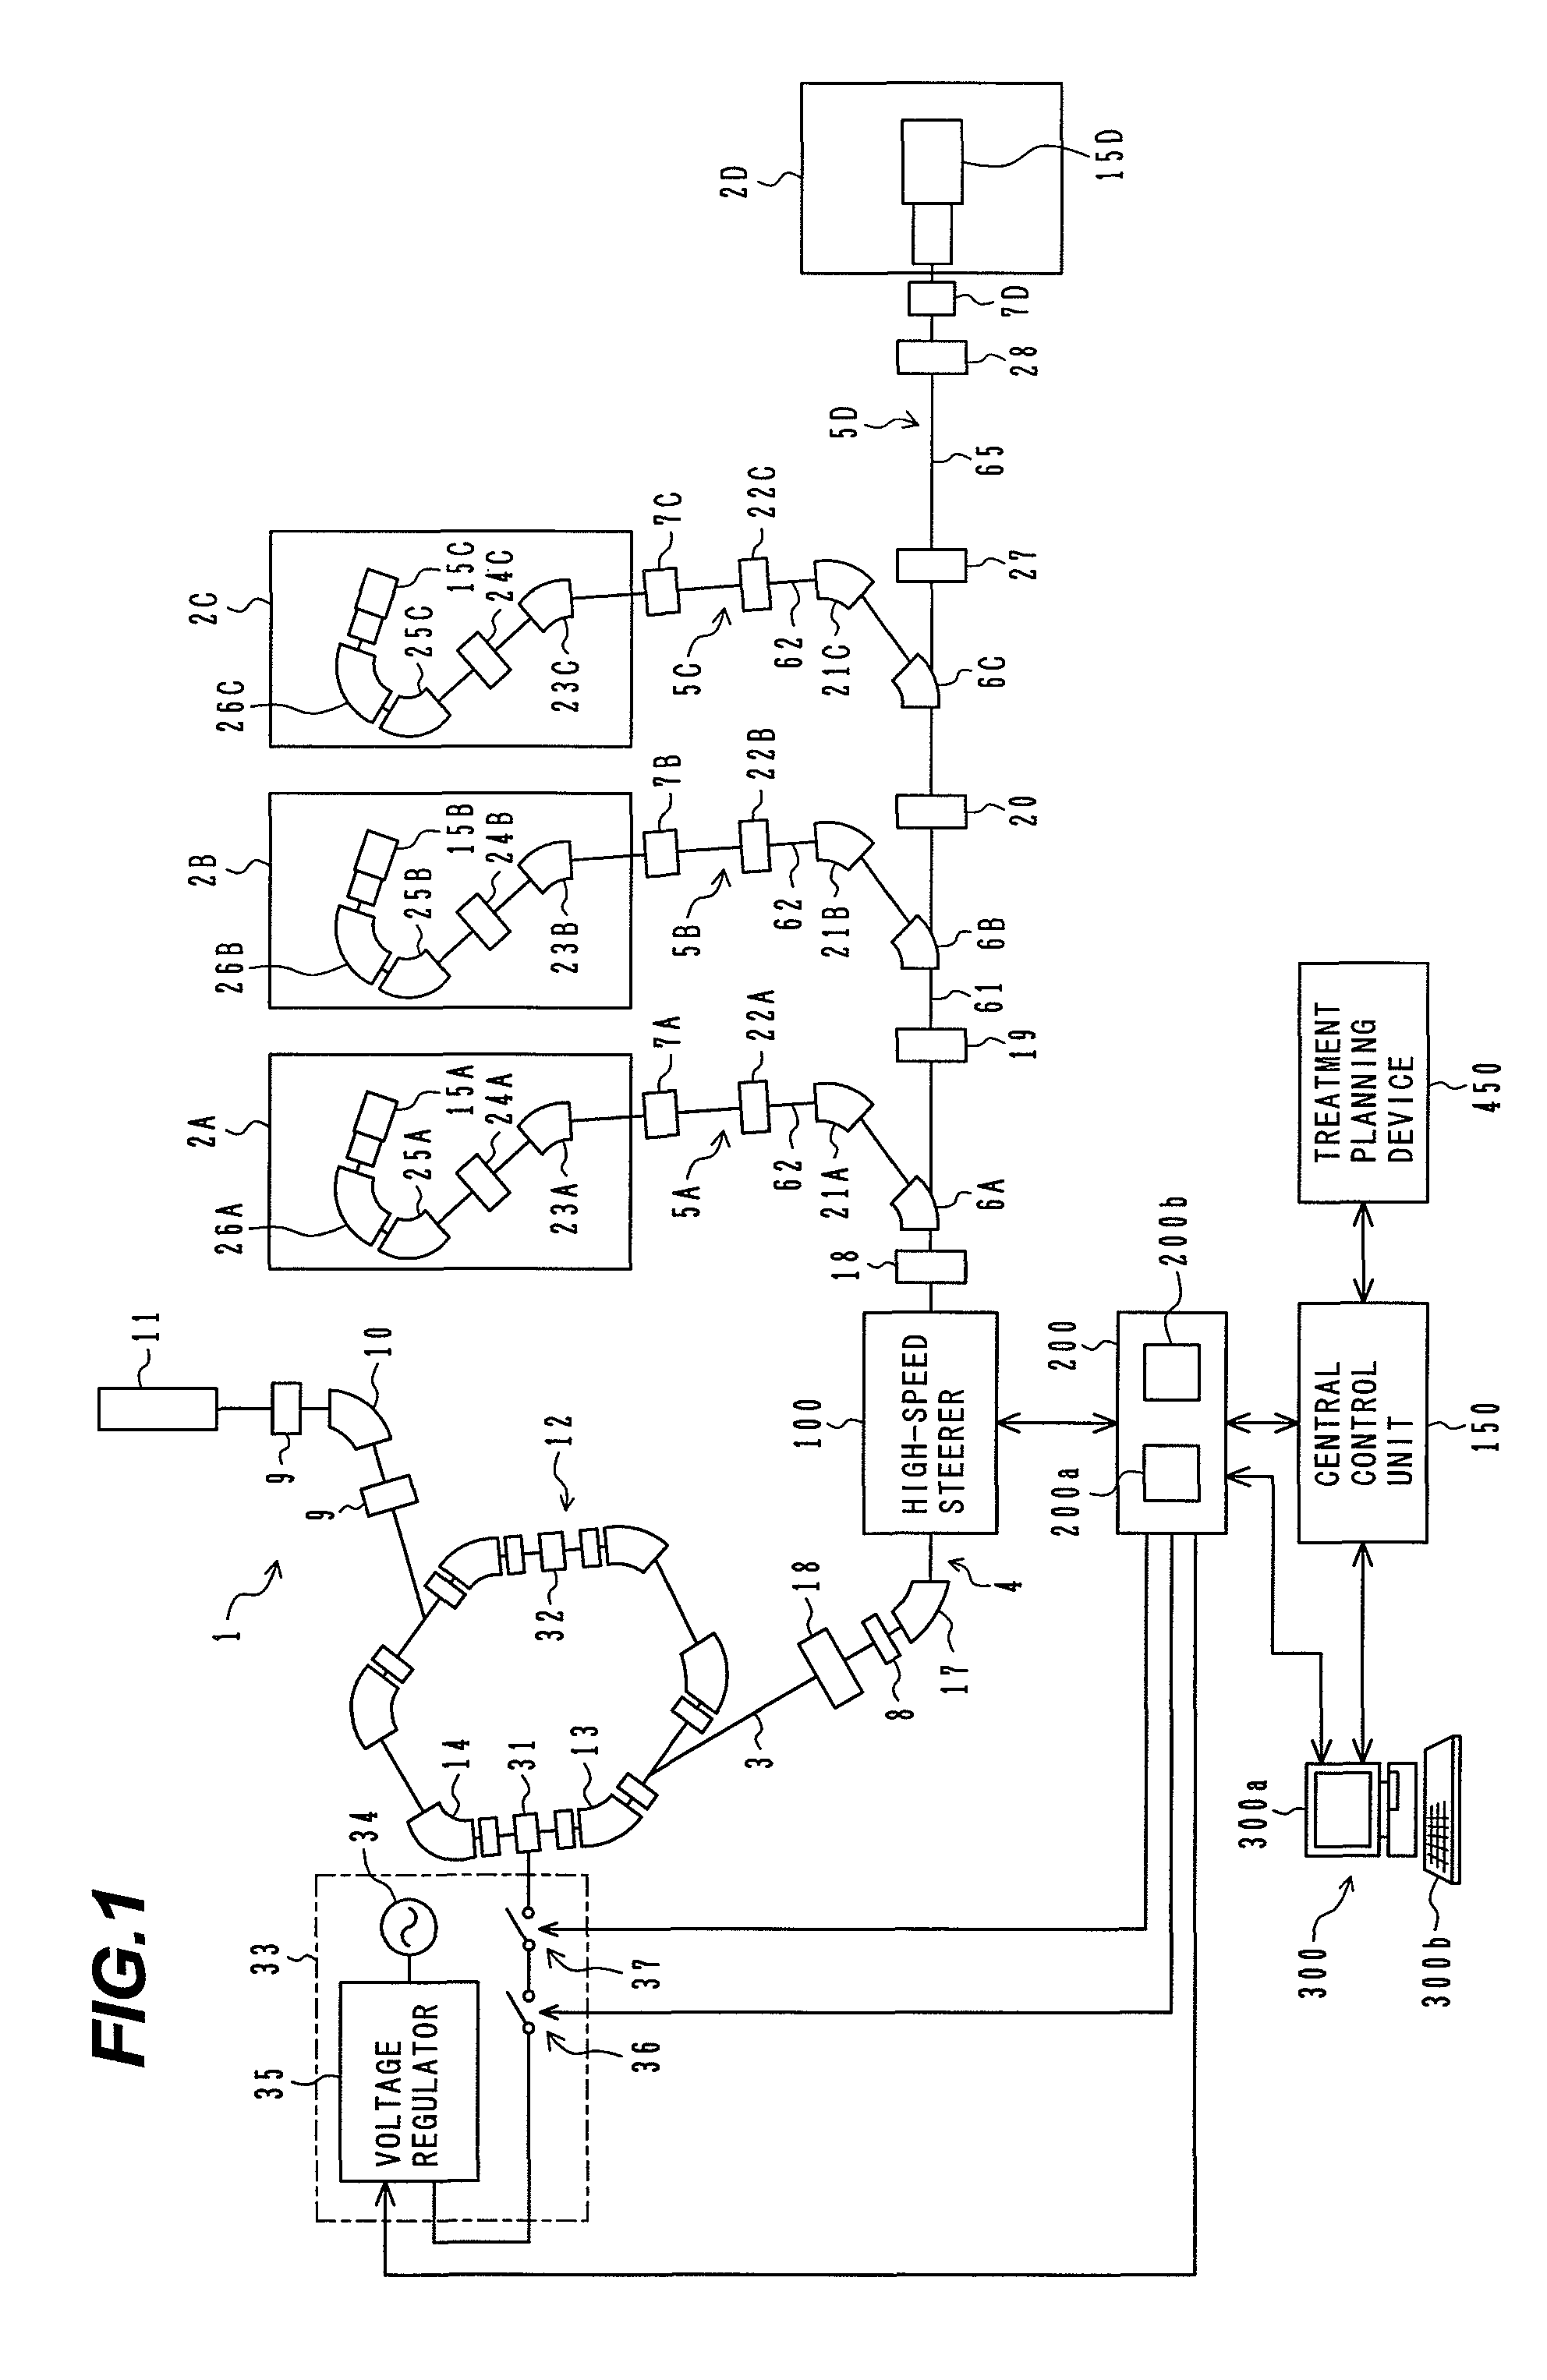 Charged particle beam irradiation system